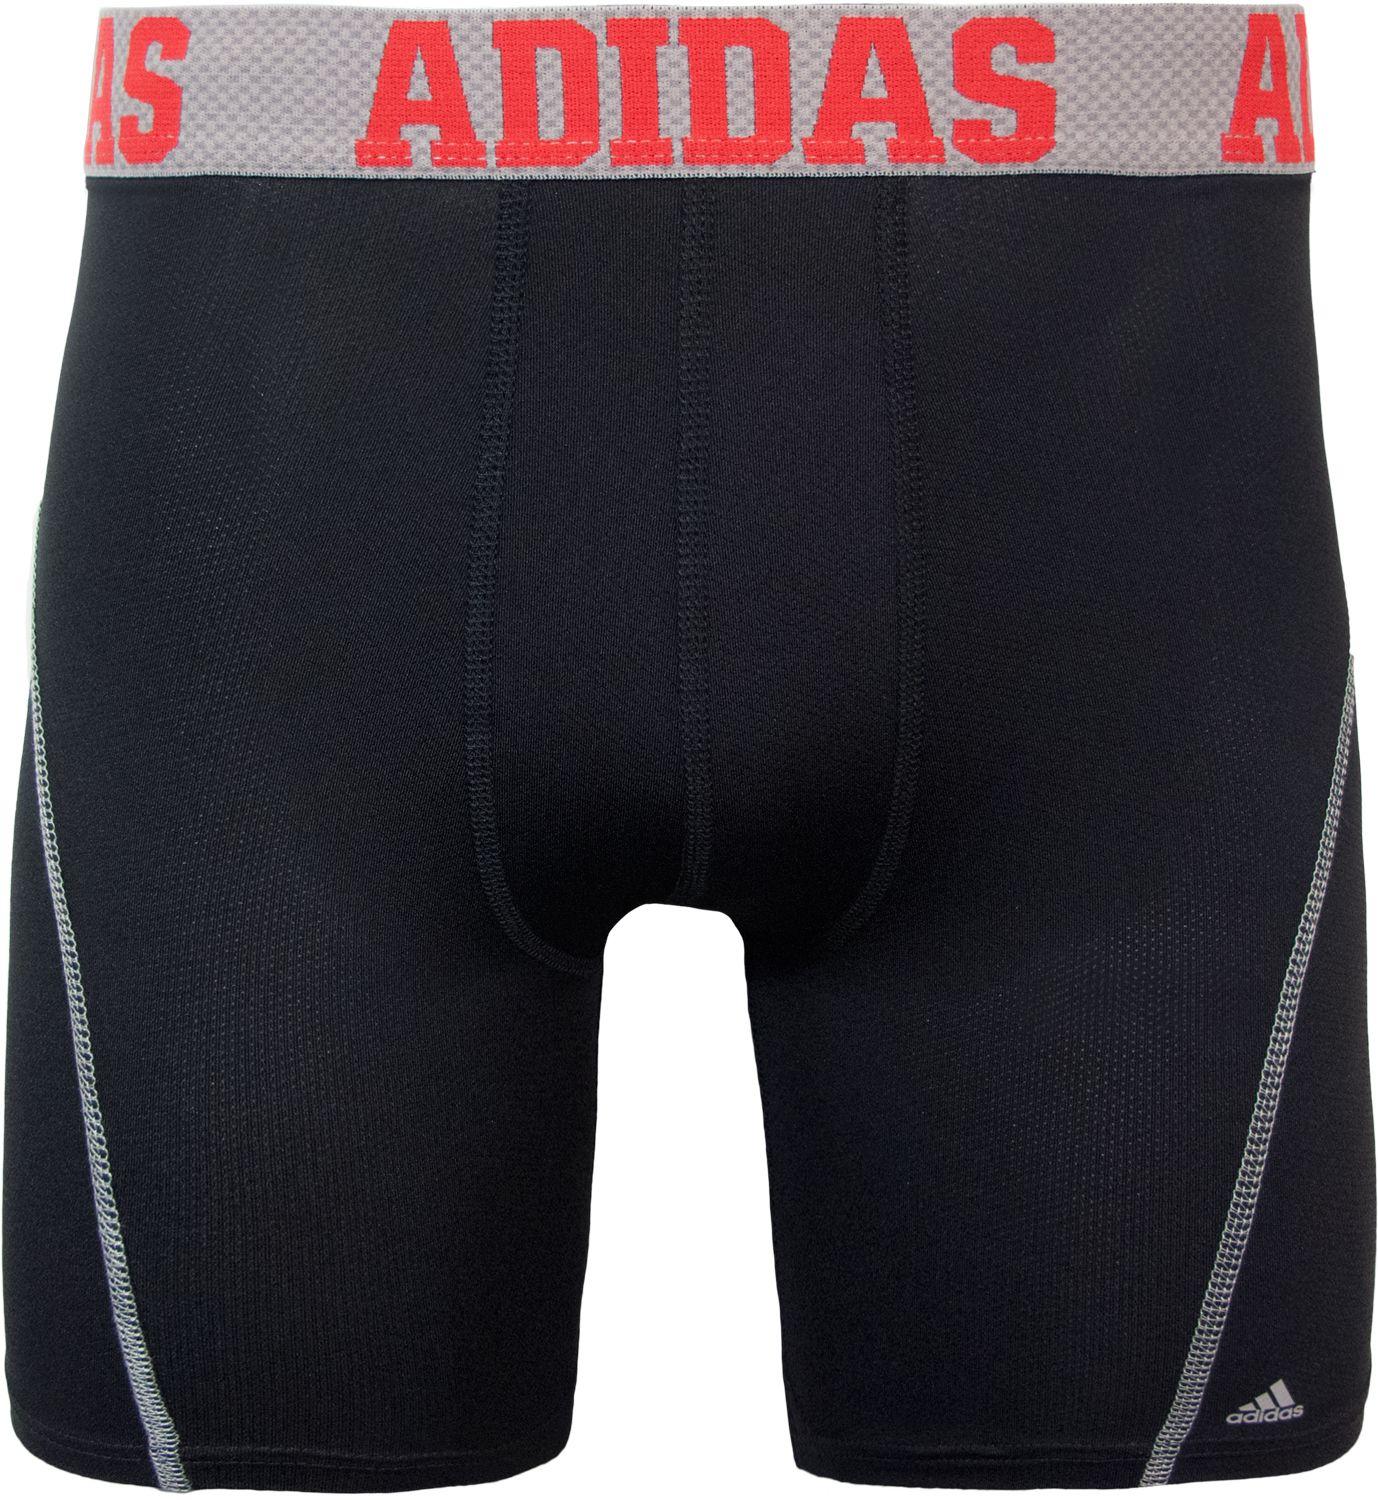 adidas men's climacool 7 midway briefs 17